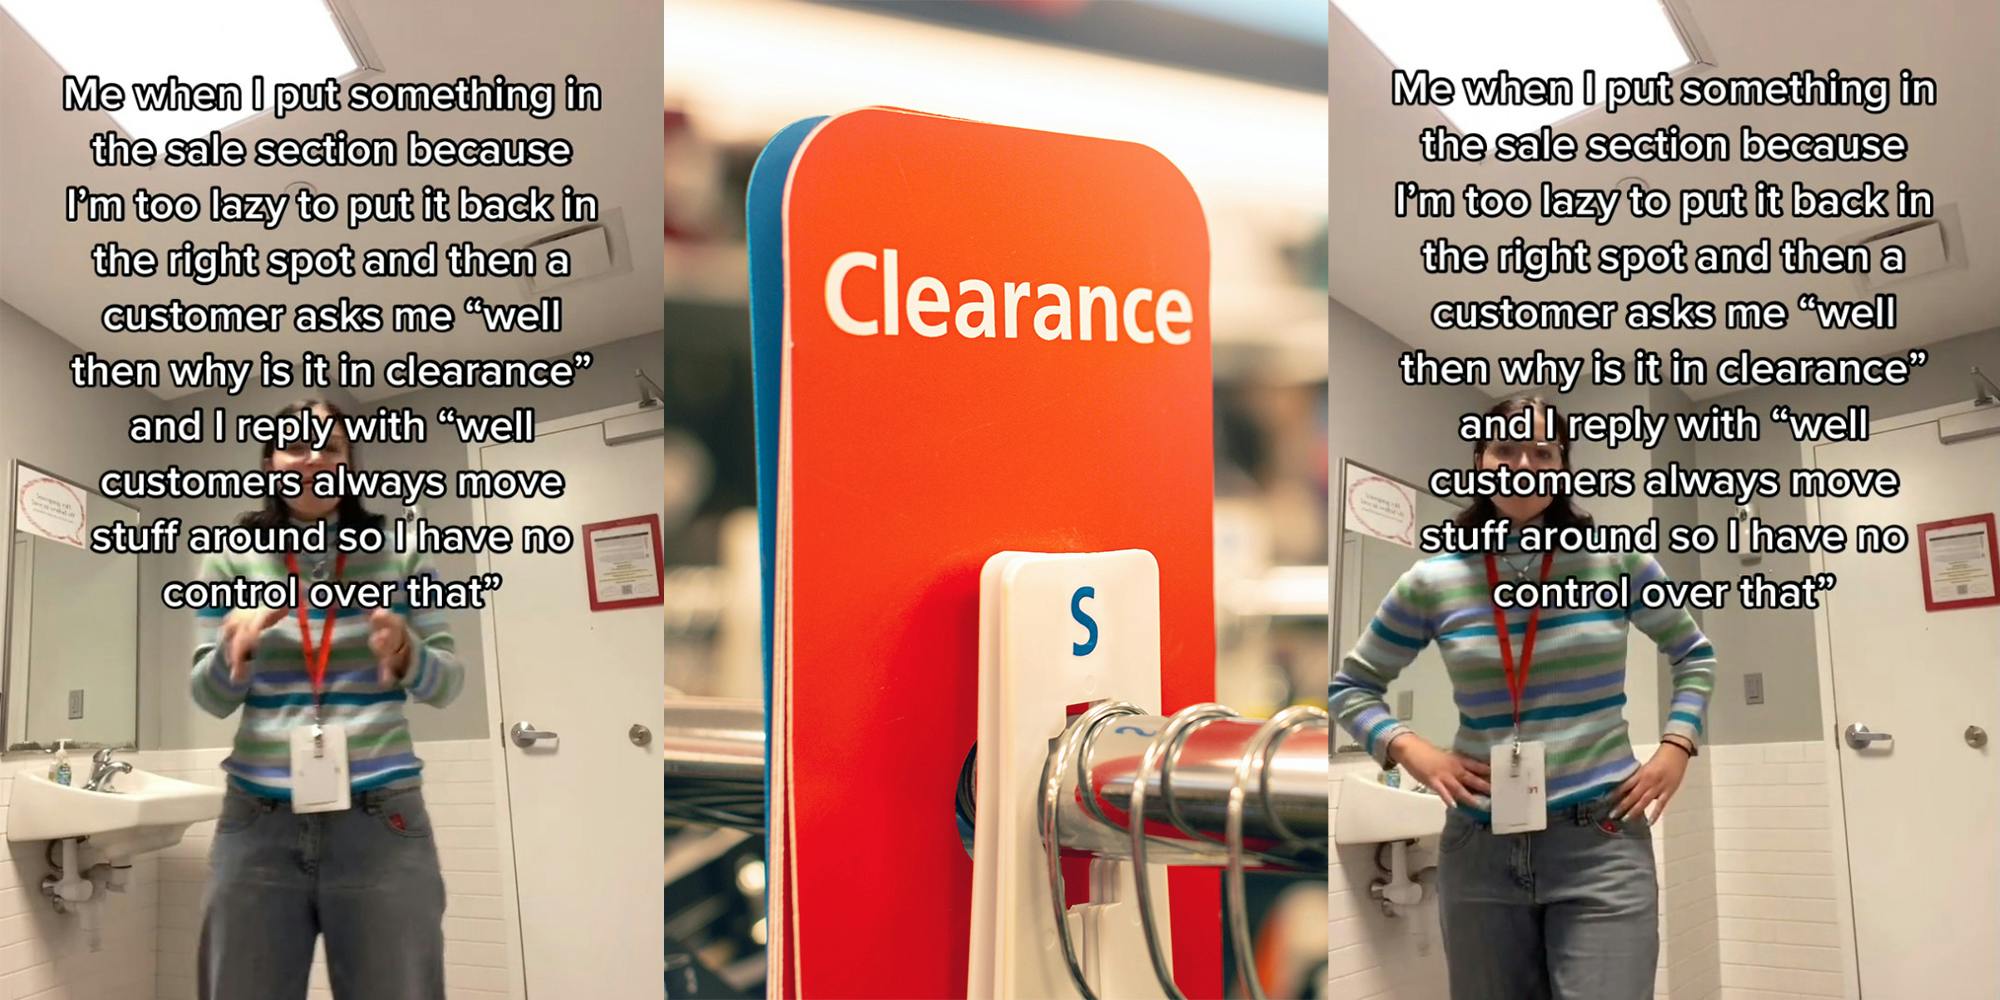 Worker Puts Random Stuff in Clearance Area because She's 'Lazy